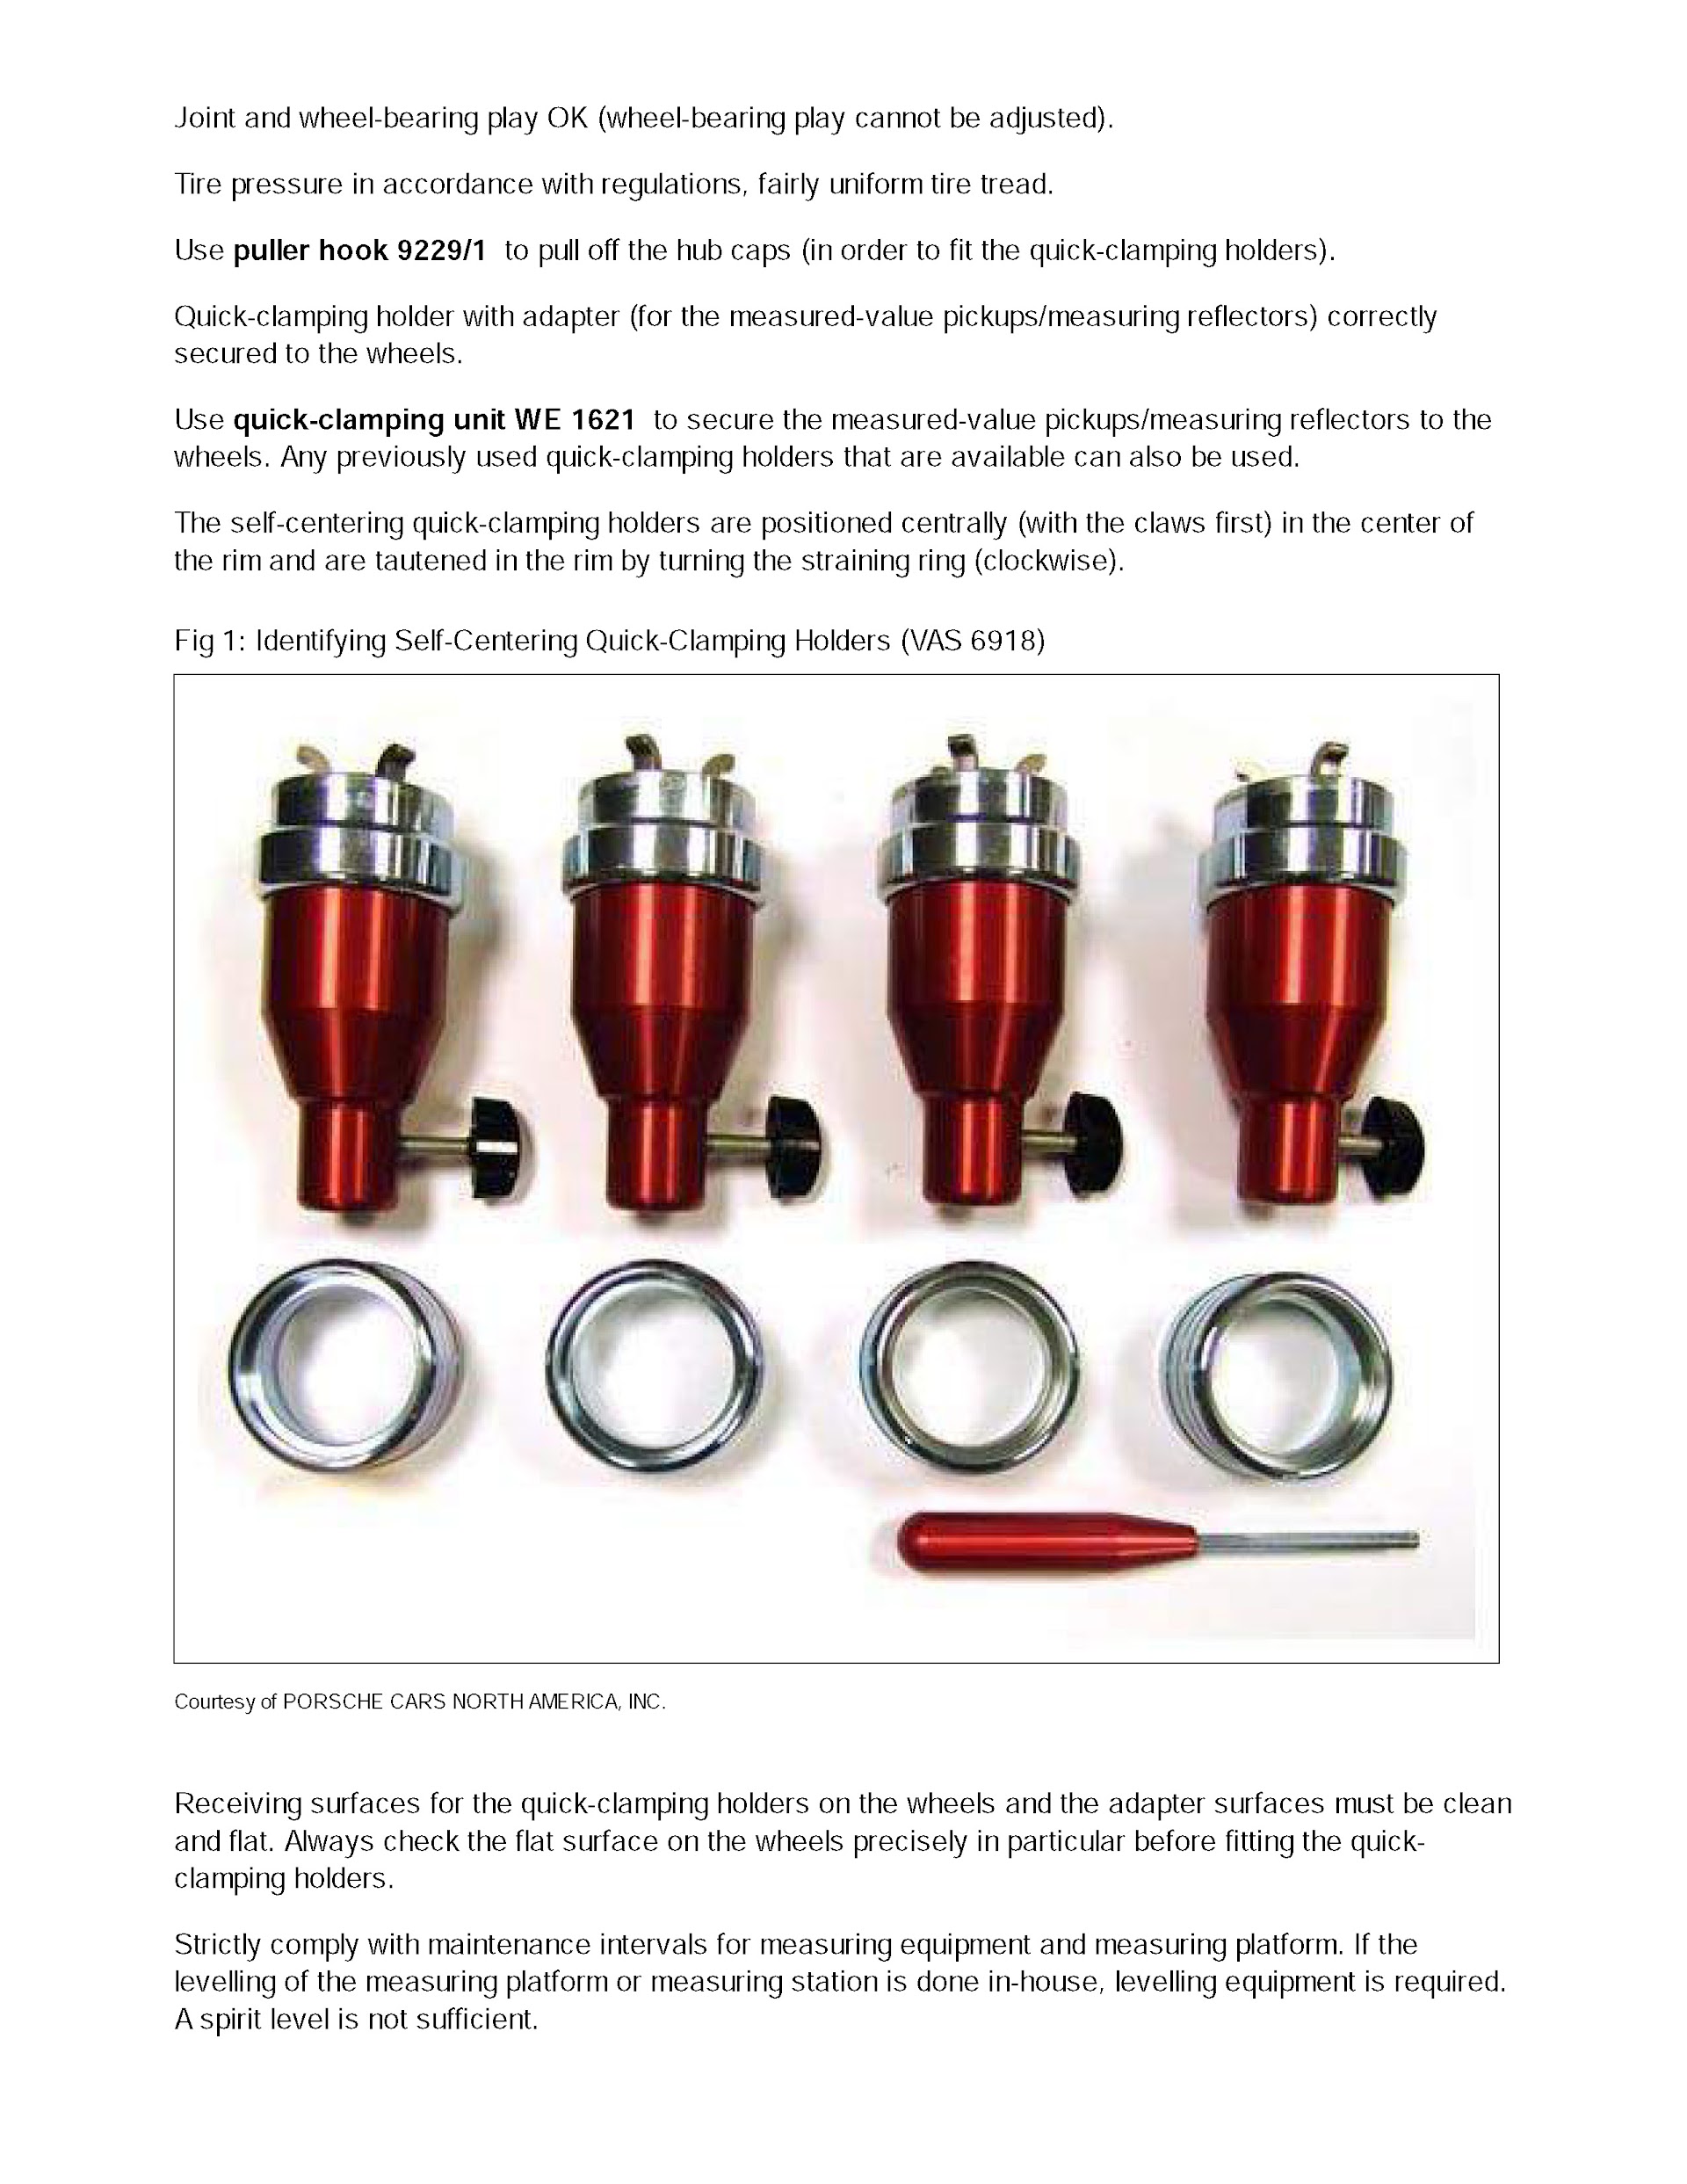 2016 Porsche Boxster Repair Manual, Quick Clamping Holders